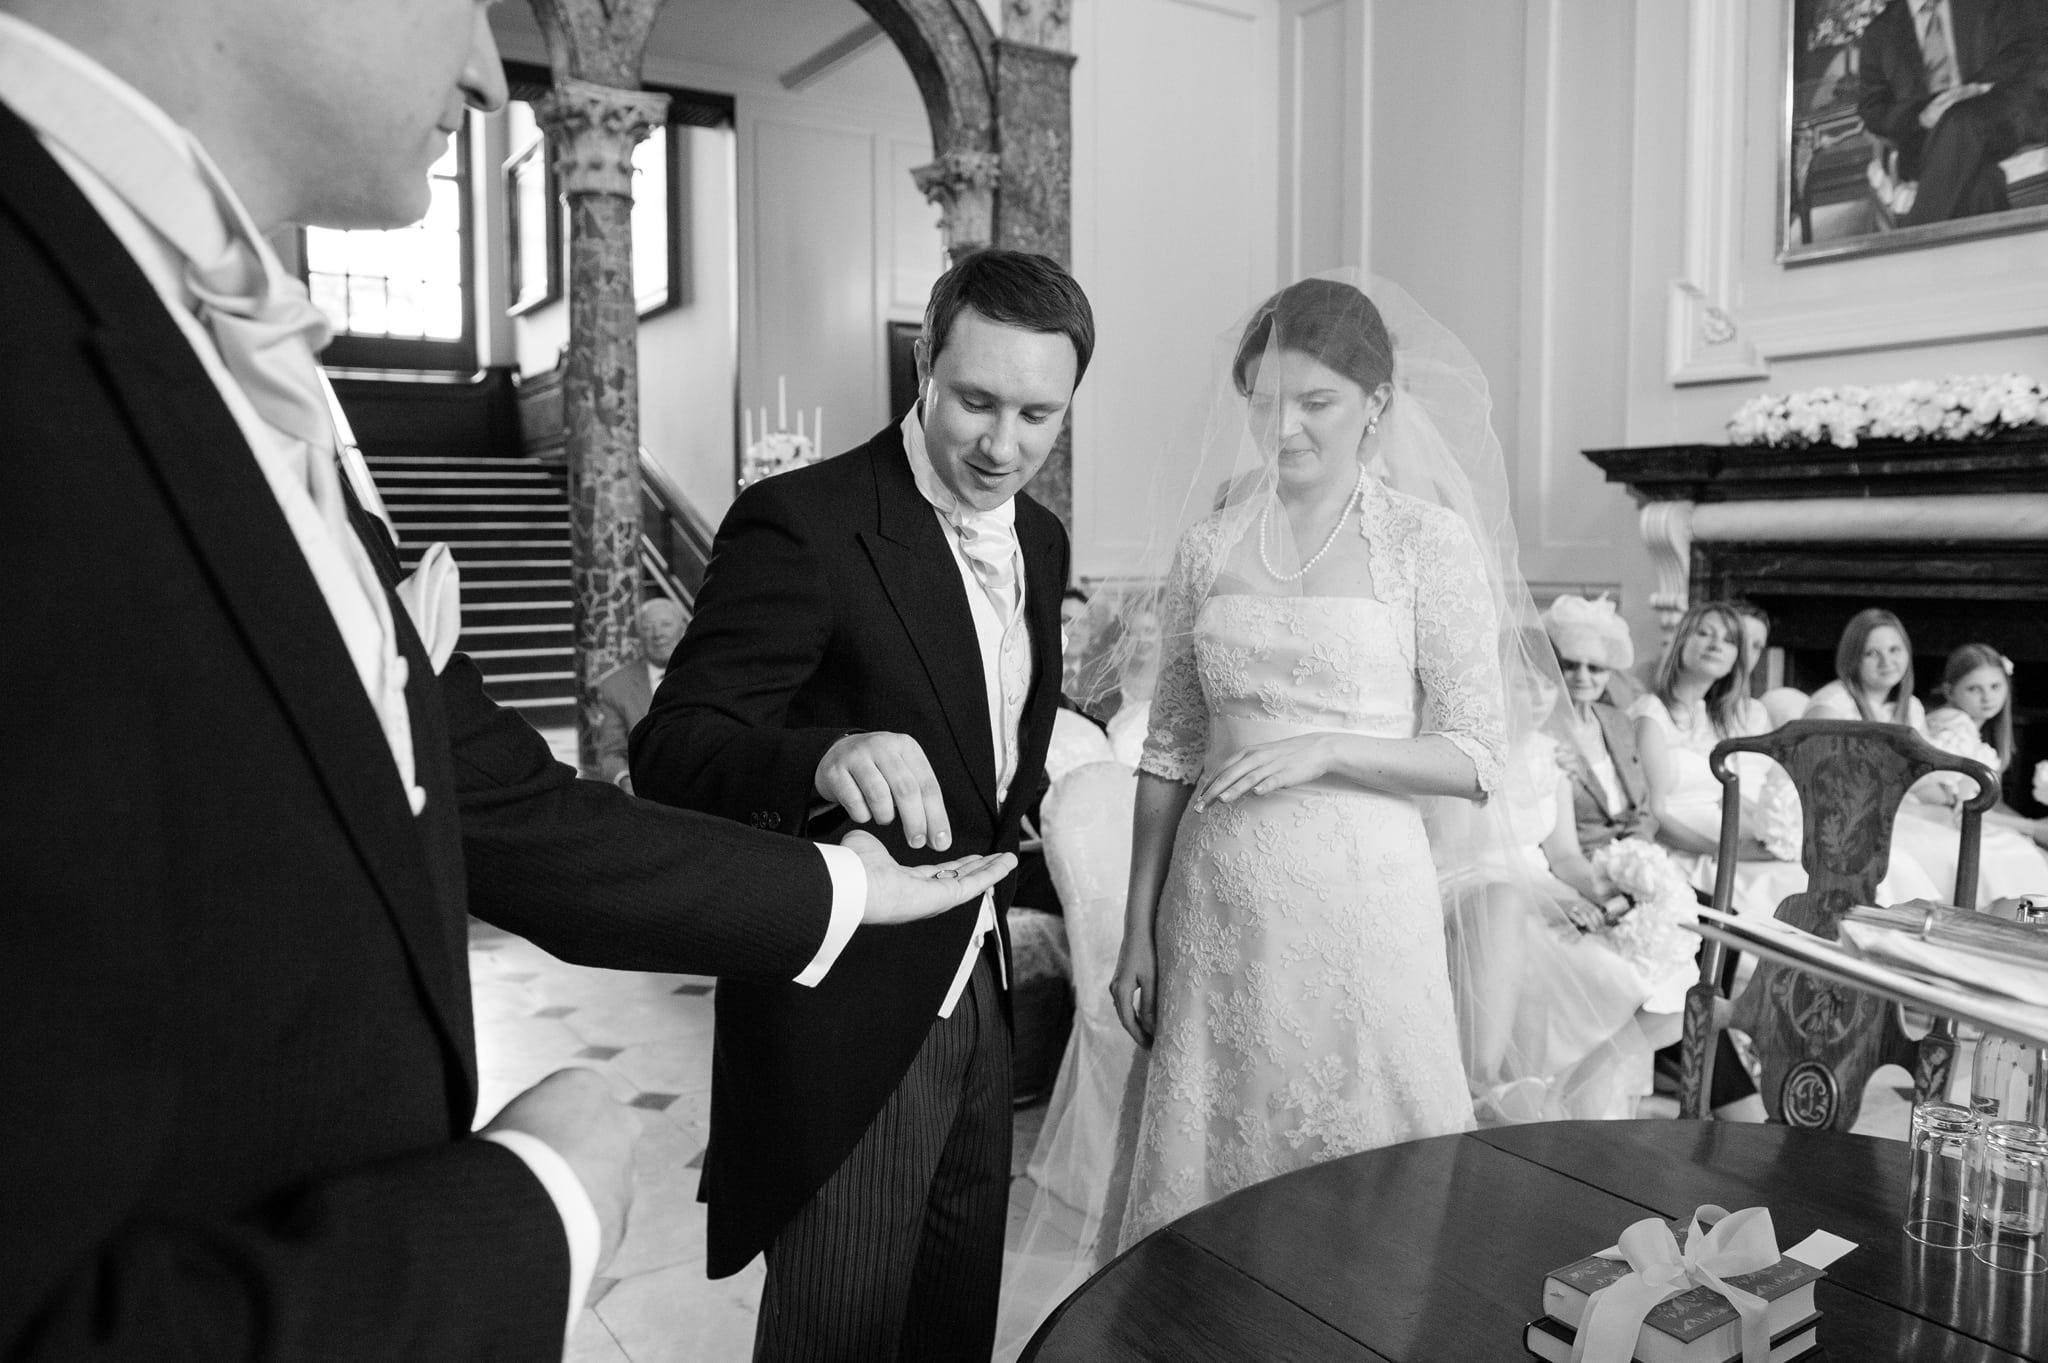 Groom taking wedding ring from best man ready to give it to the bride